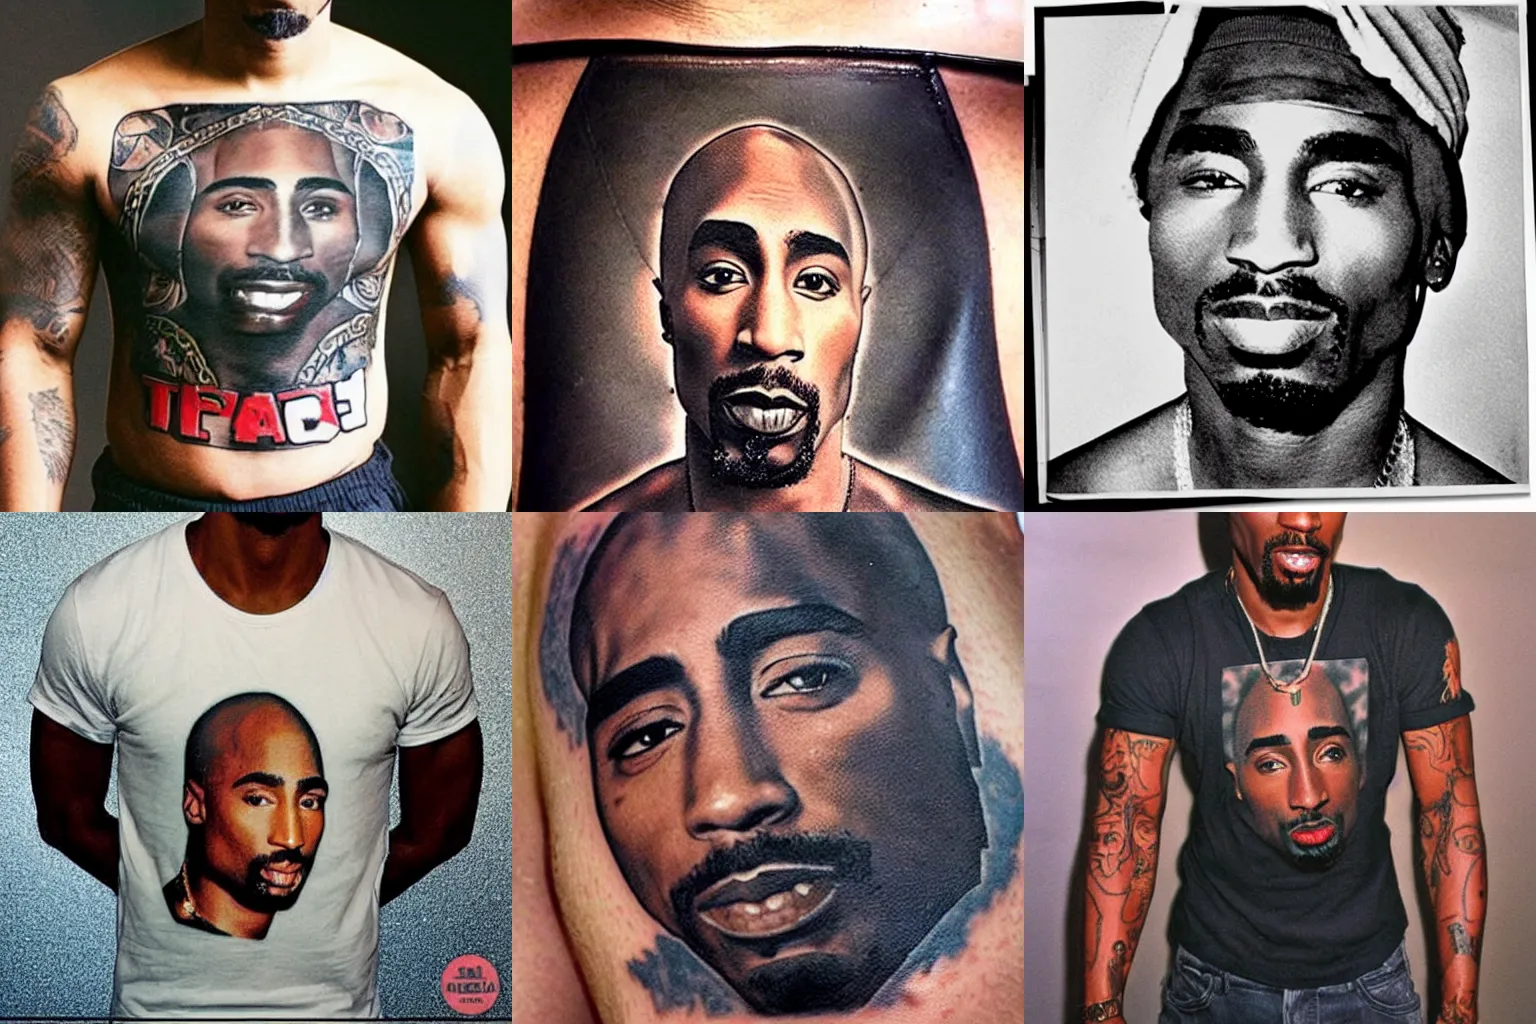 Tupac Posters 2Pac Poster Shirtless Photo with Tattoos 90s Hip Hop Rapper  Posters For Room Aesthetic Mid 90s 2Pac Memorabilia Rap Posters Merchandise  Merch Cool Wall Decor Art Print Poster 24x36 -